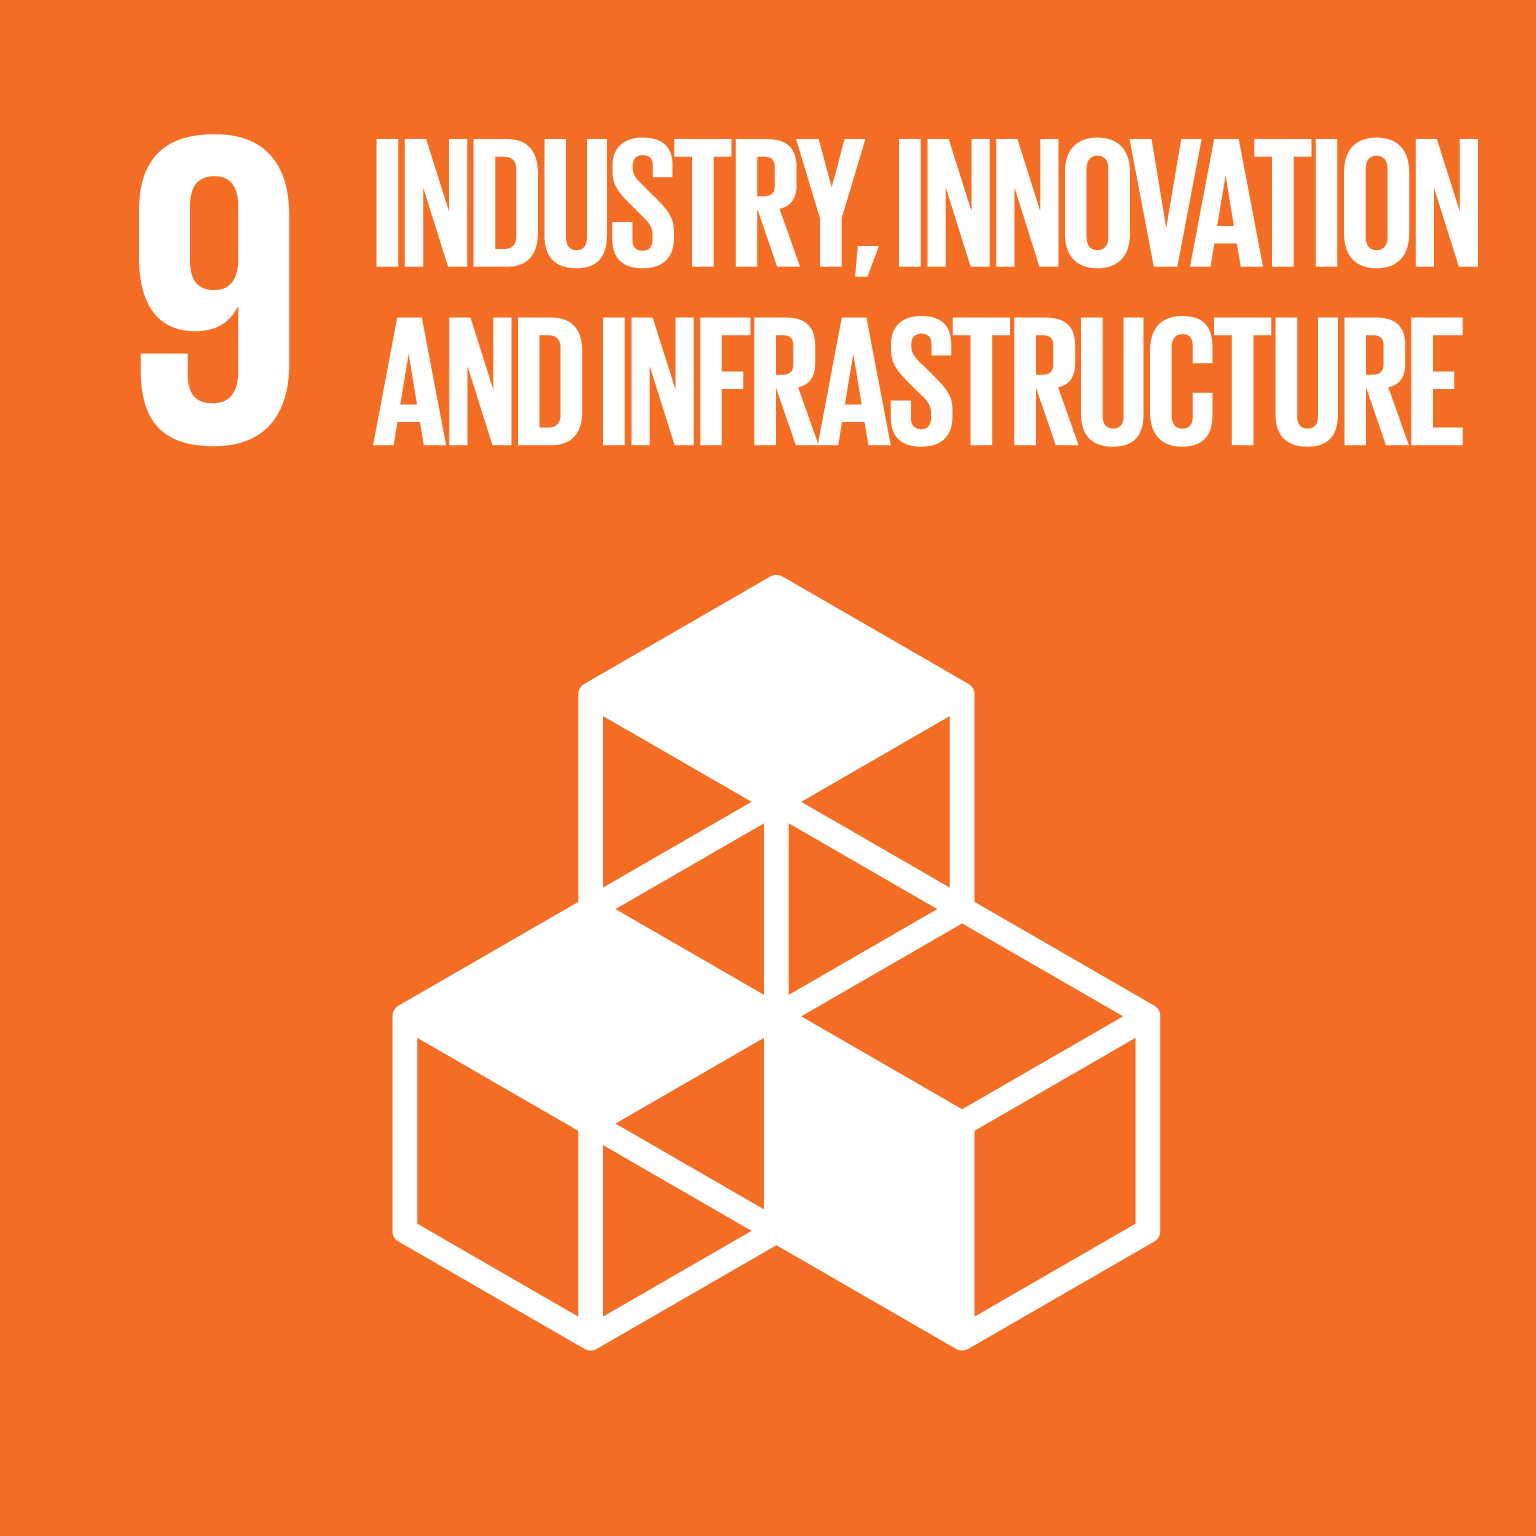 Goal 9. Industry, Innovation, and Infrastructure